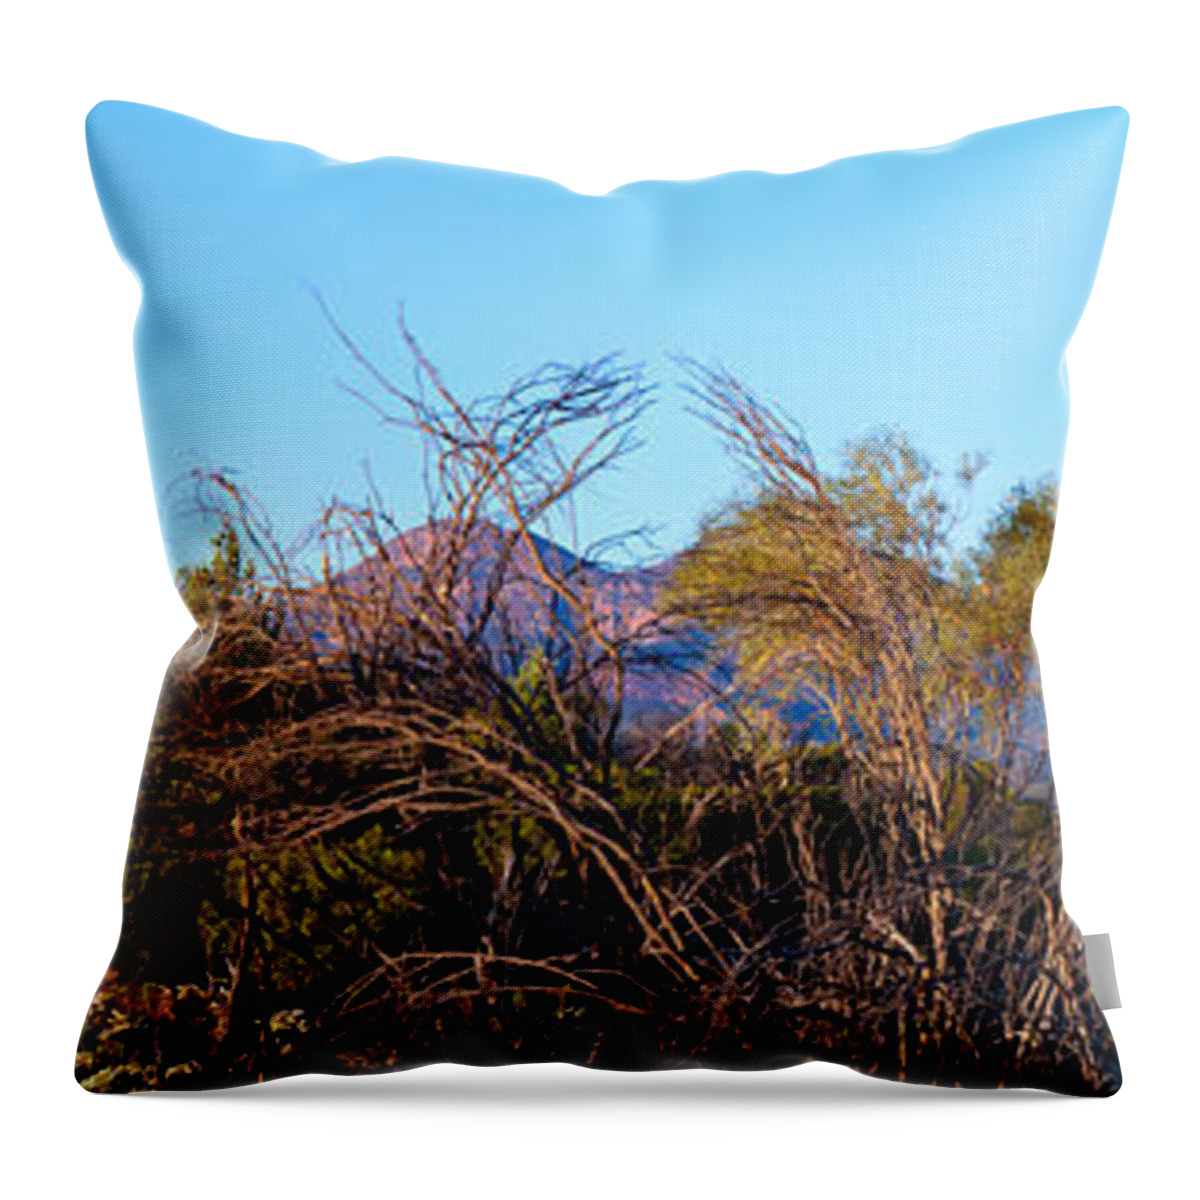 Bunyeroo Valley Wilpena Pound St Mary Peak Lookout Outback Landscape Landscapes Flinders Ranges South Australia Throw Pillow featuring the photograph Bunyeroo Valley #2 by Bill Robinson